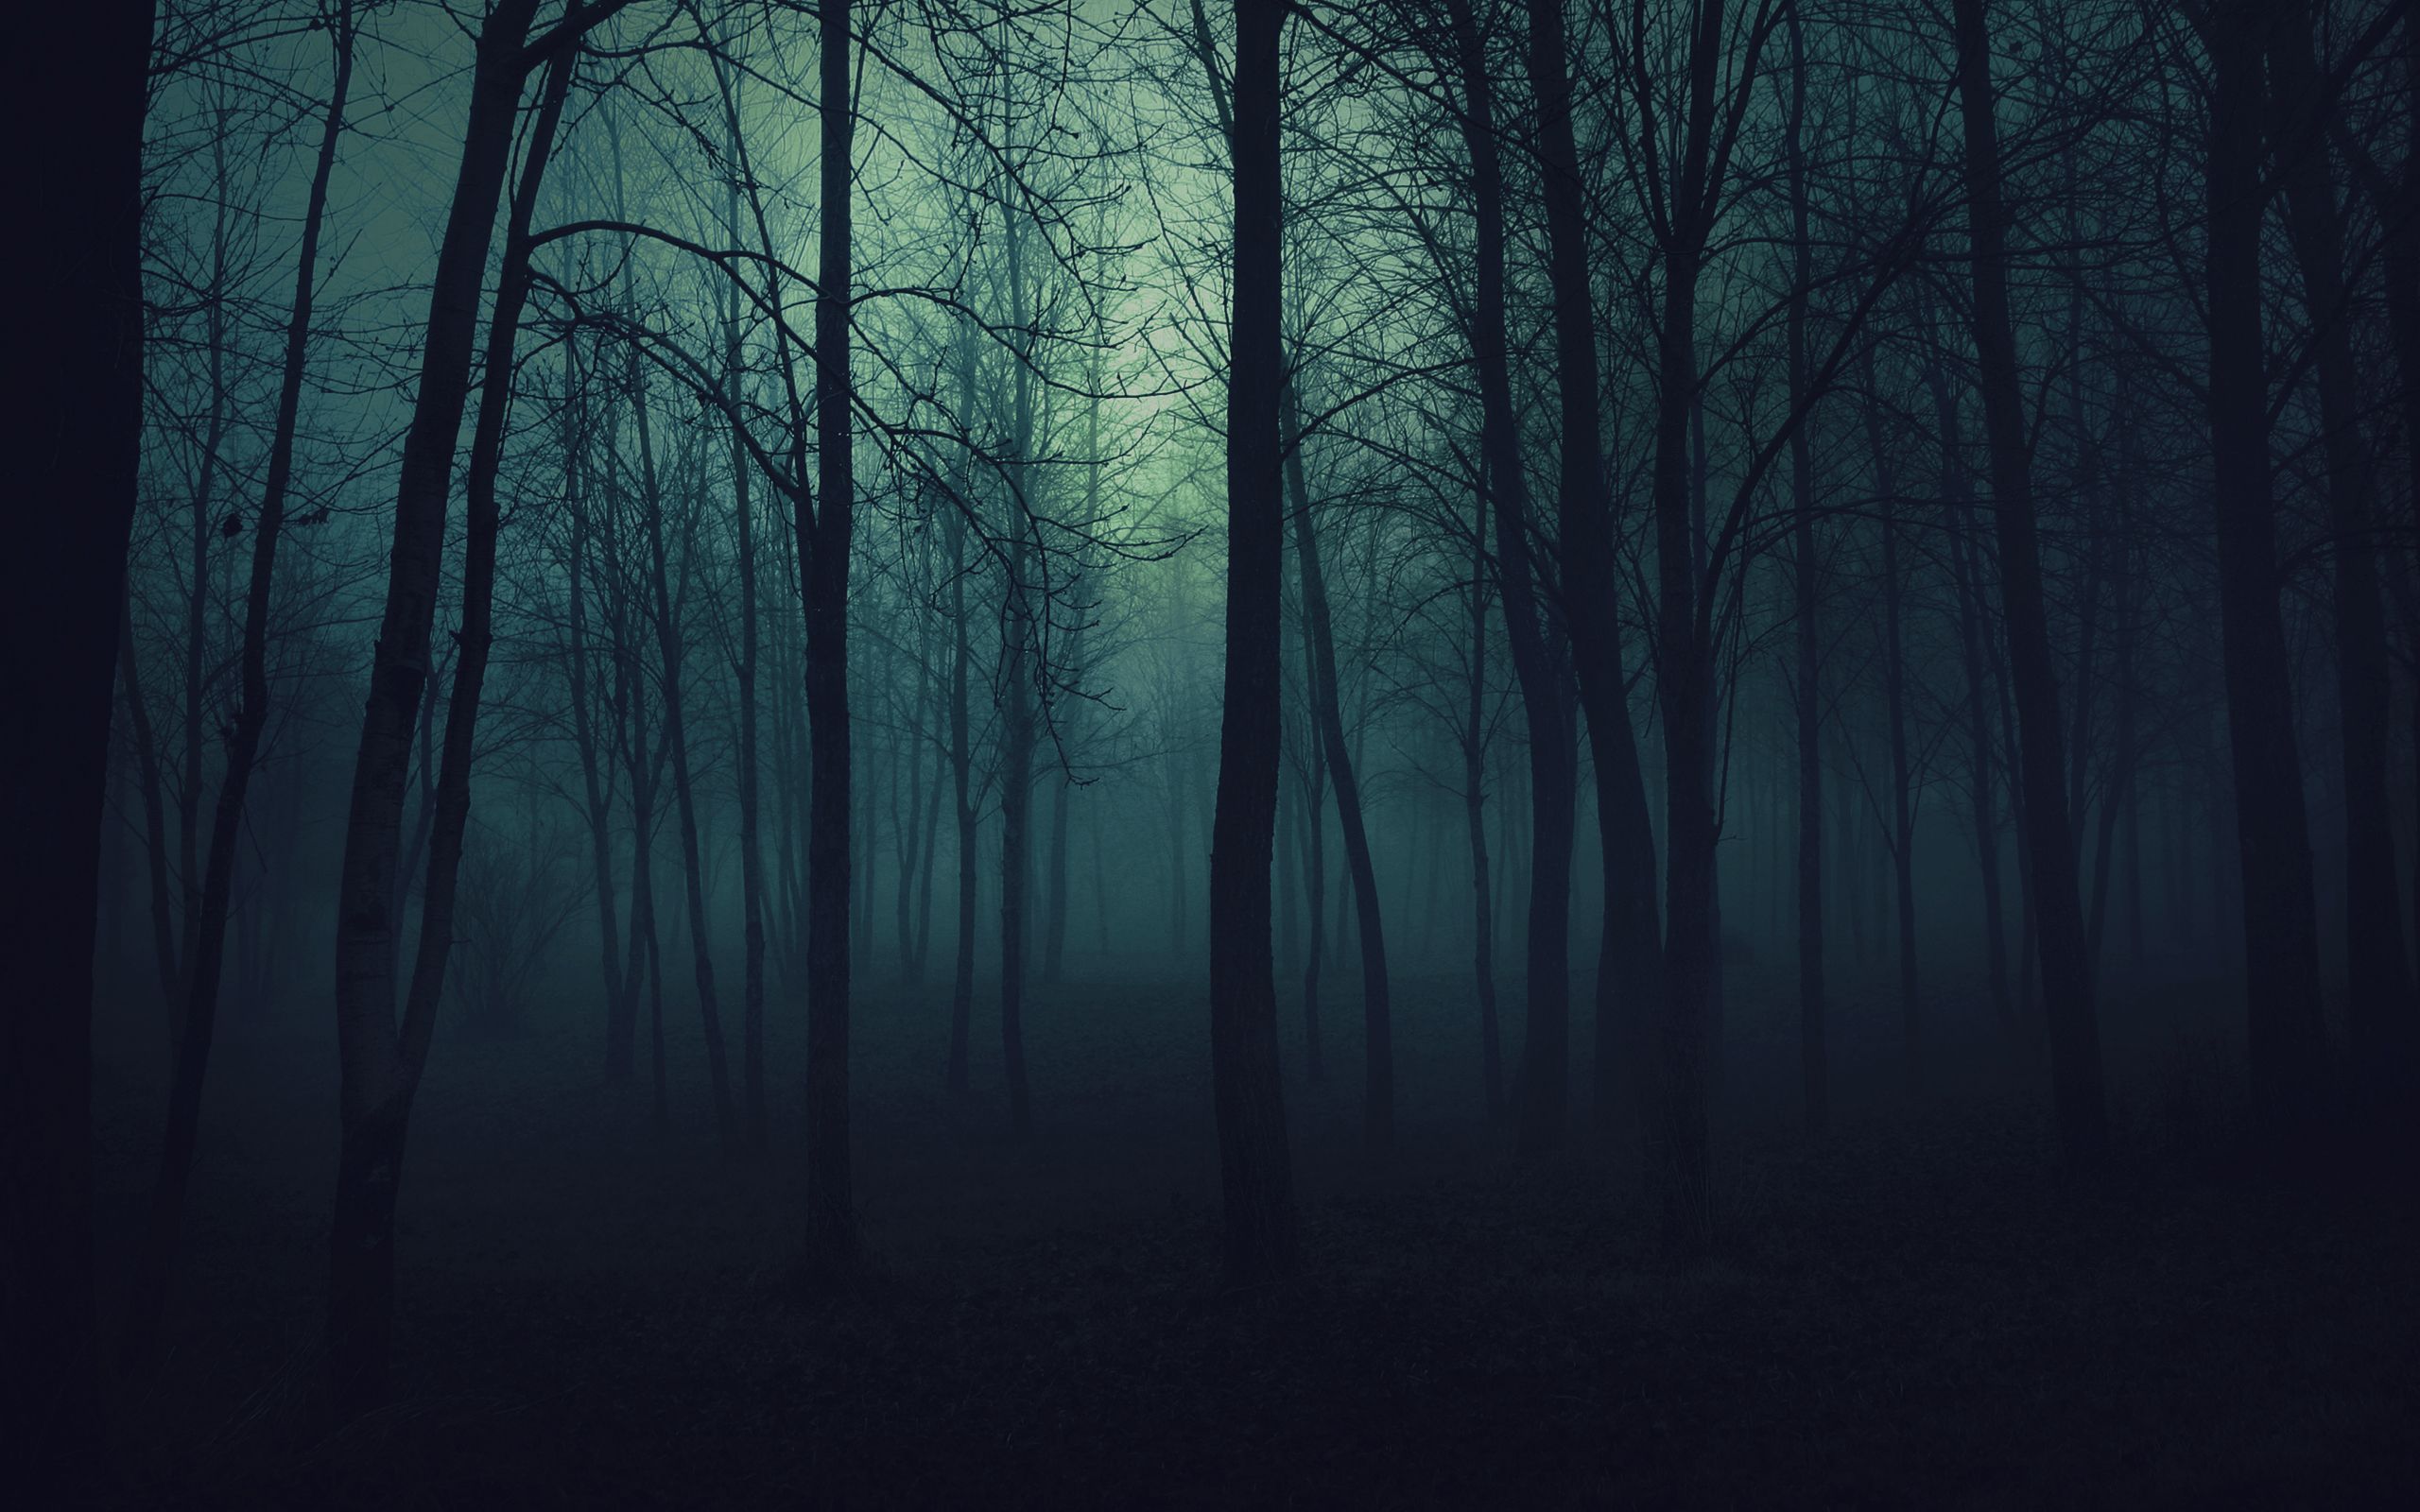 Dark Scary Forest Background Images Pictures   Becuo THE FIELD 2560x1600